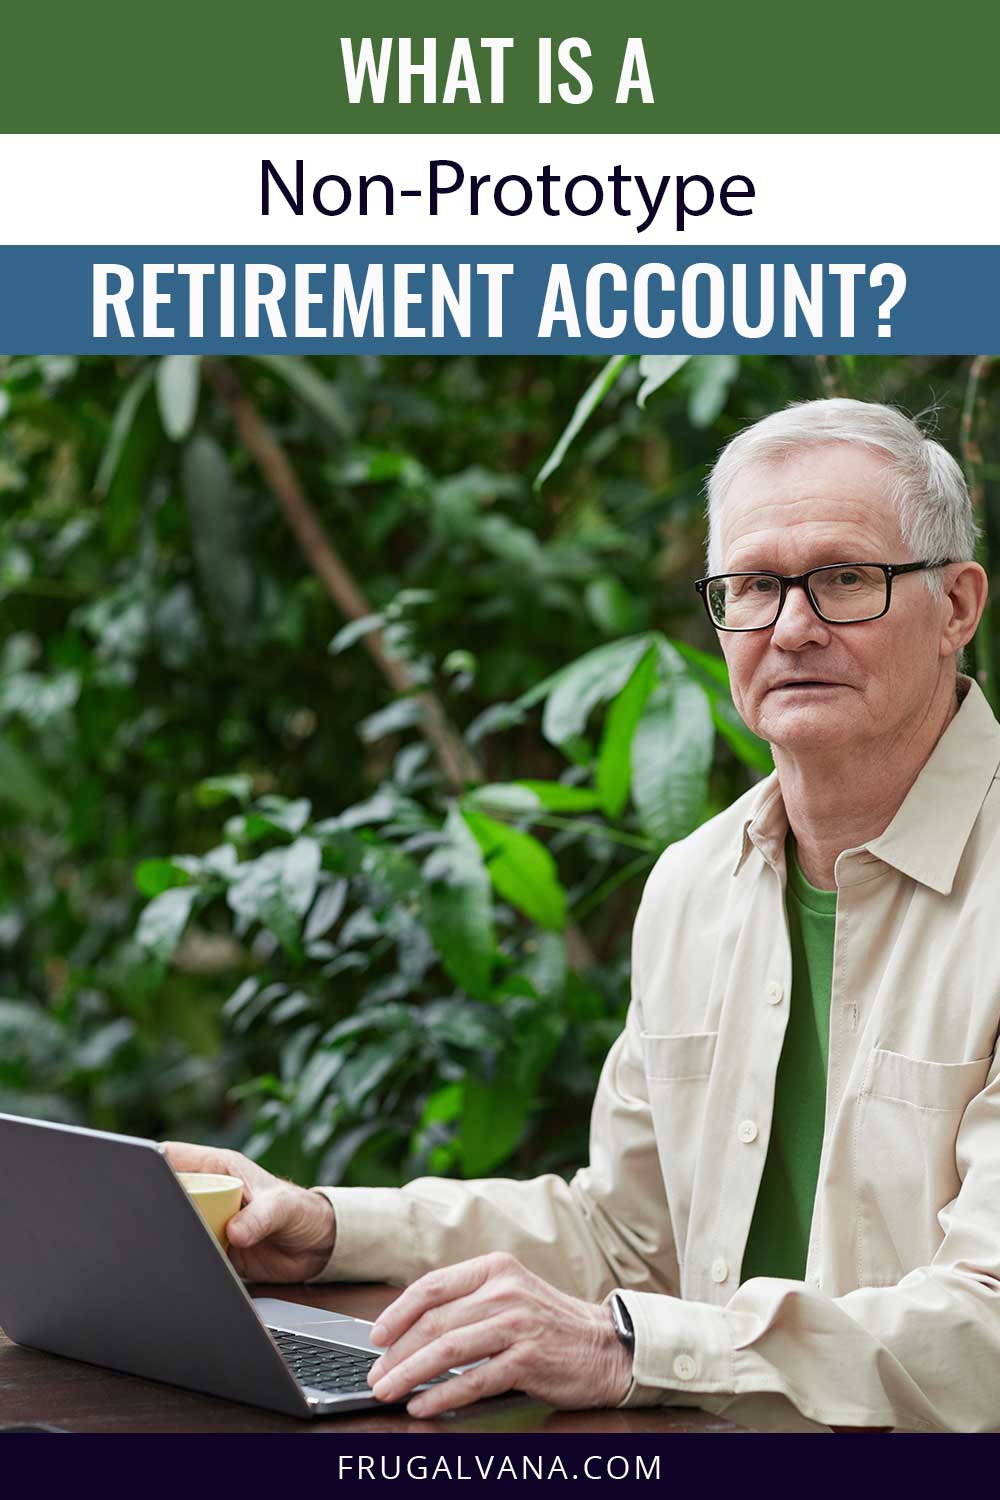 What is a Non-Prototype Retirement Account?